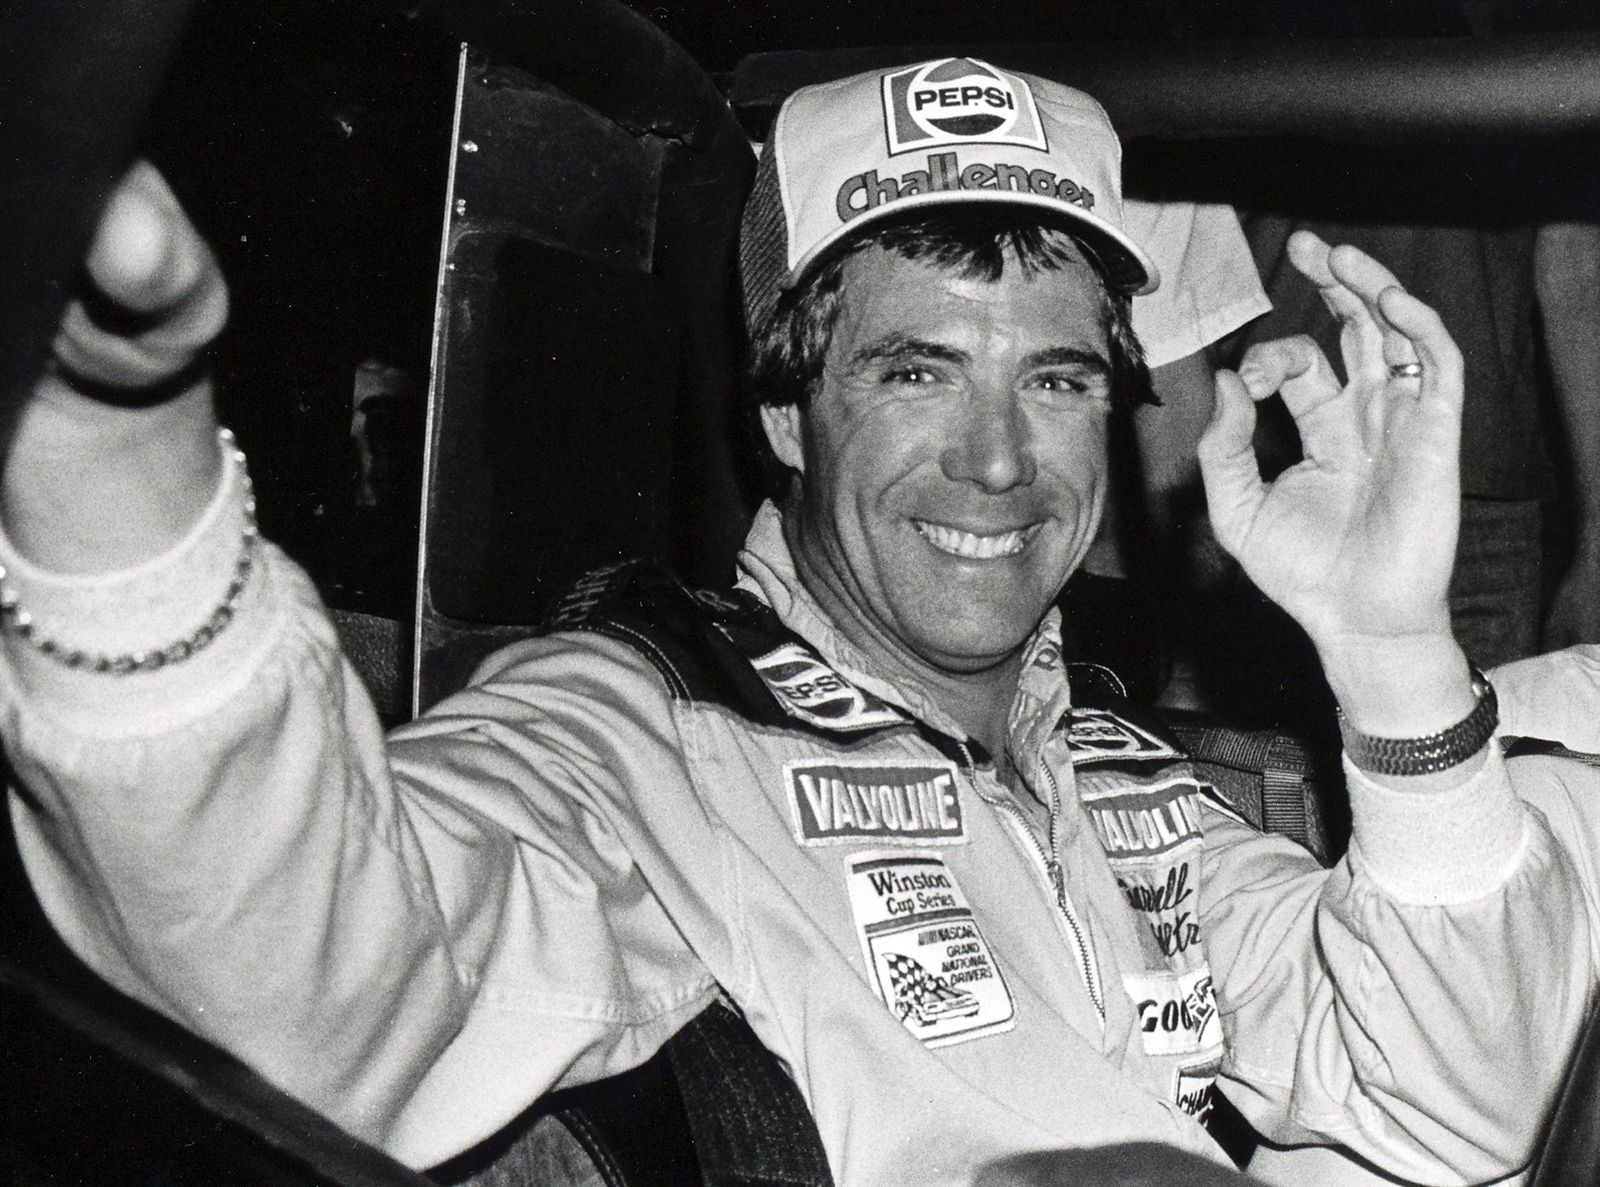 Darrell Waltrip gives the 'okay' before going on to win in '83